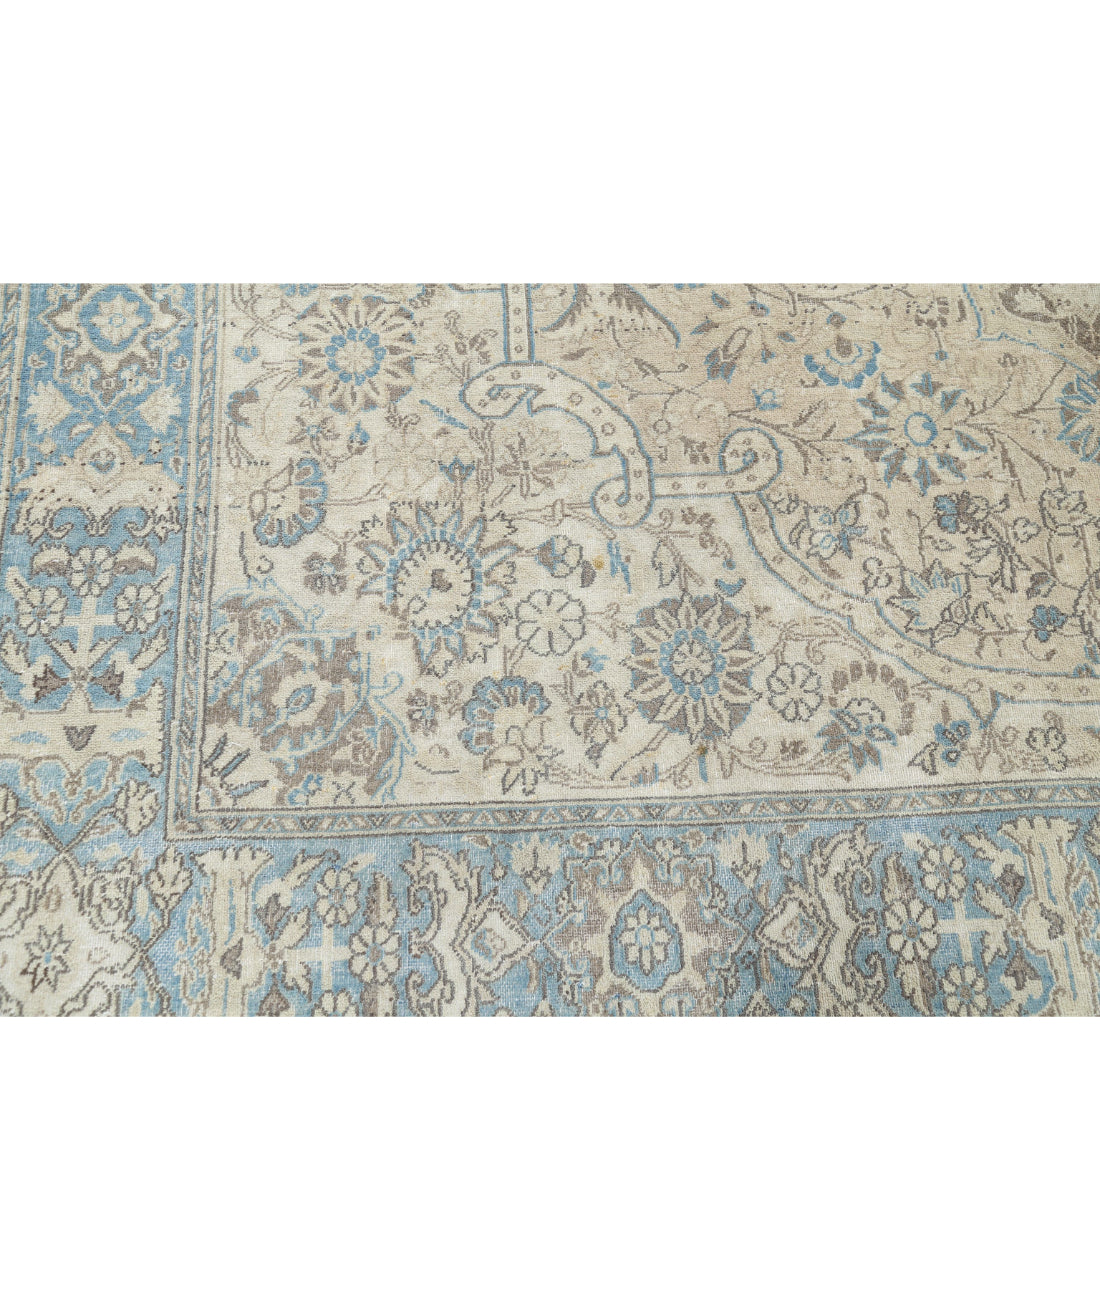 Hand Knotted Vintage Persian Nain Wool Rug - 7'8'' x 11'2'' 7'8'' x 11'2'' (230 X 335) / Taupe / Blue